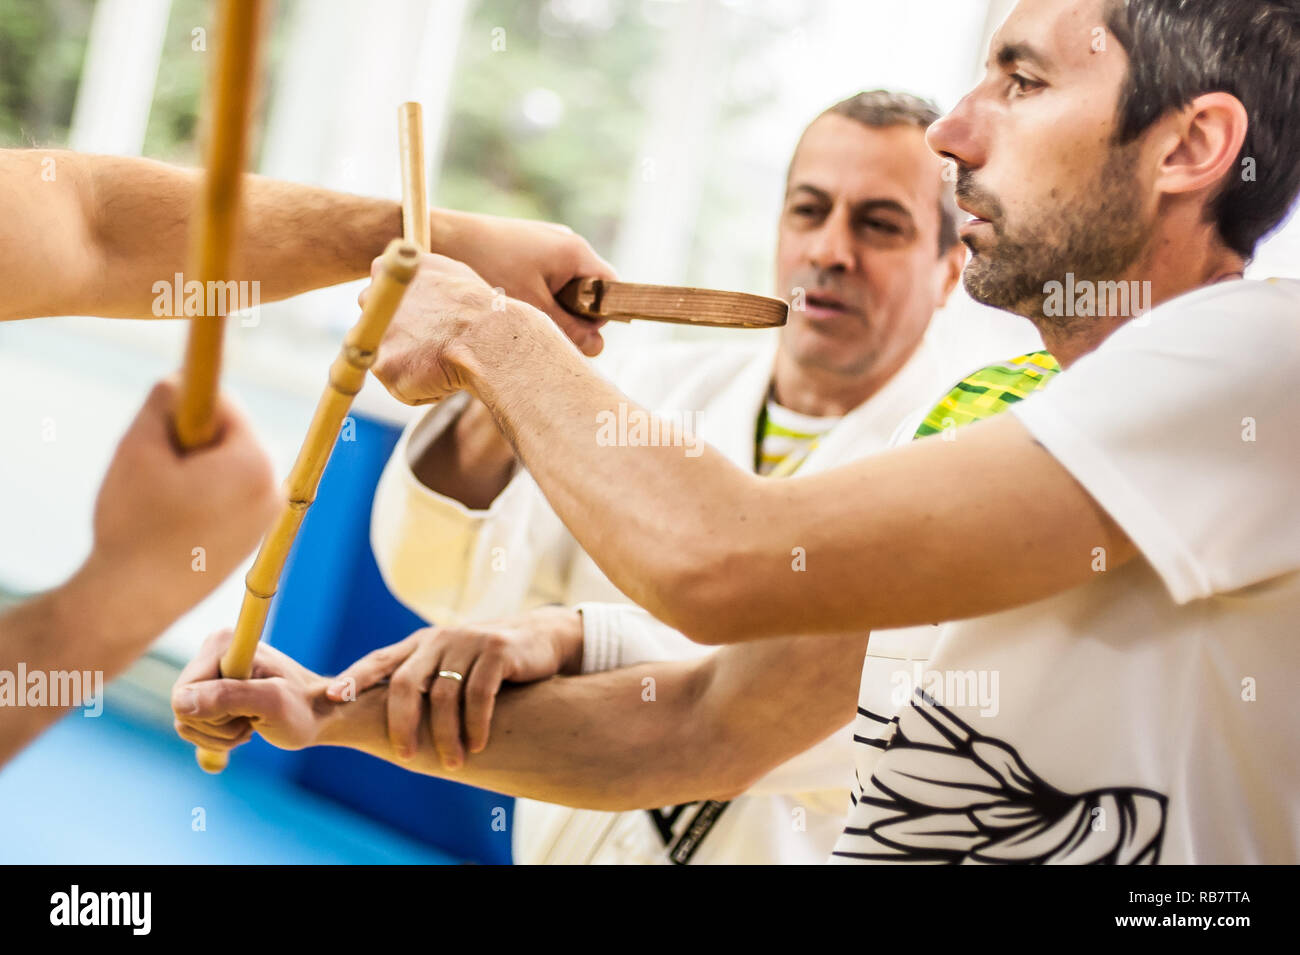 PLOVDIV, BULGARIA - 15. DECEMBER 2018. Stick and knife together fighting techniques training. Kapap instructor Avi Nardia teaches his students on KAPA Stock Photo